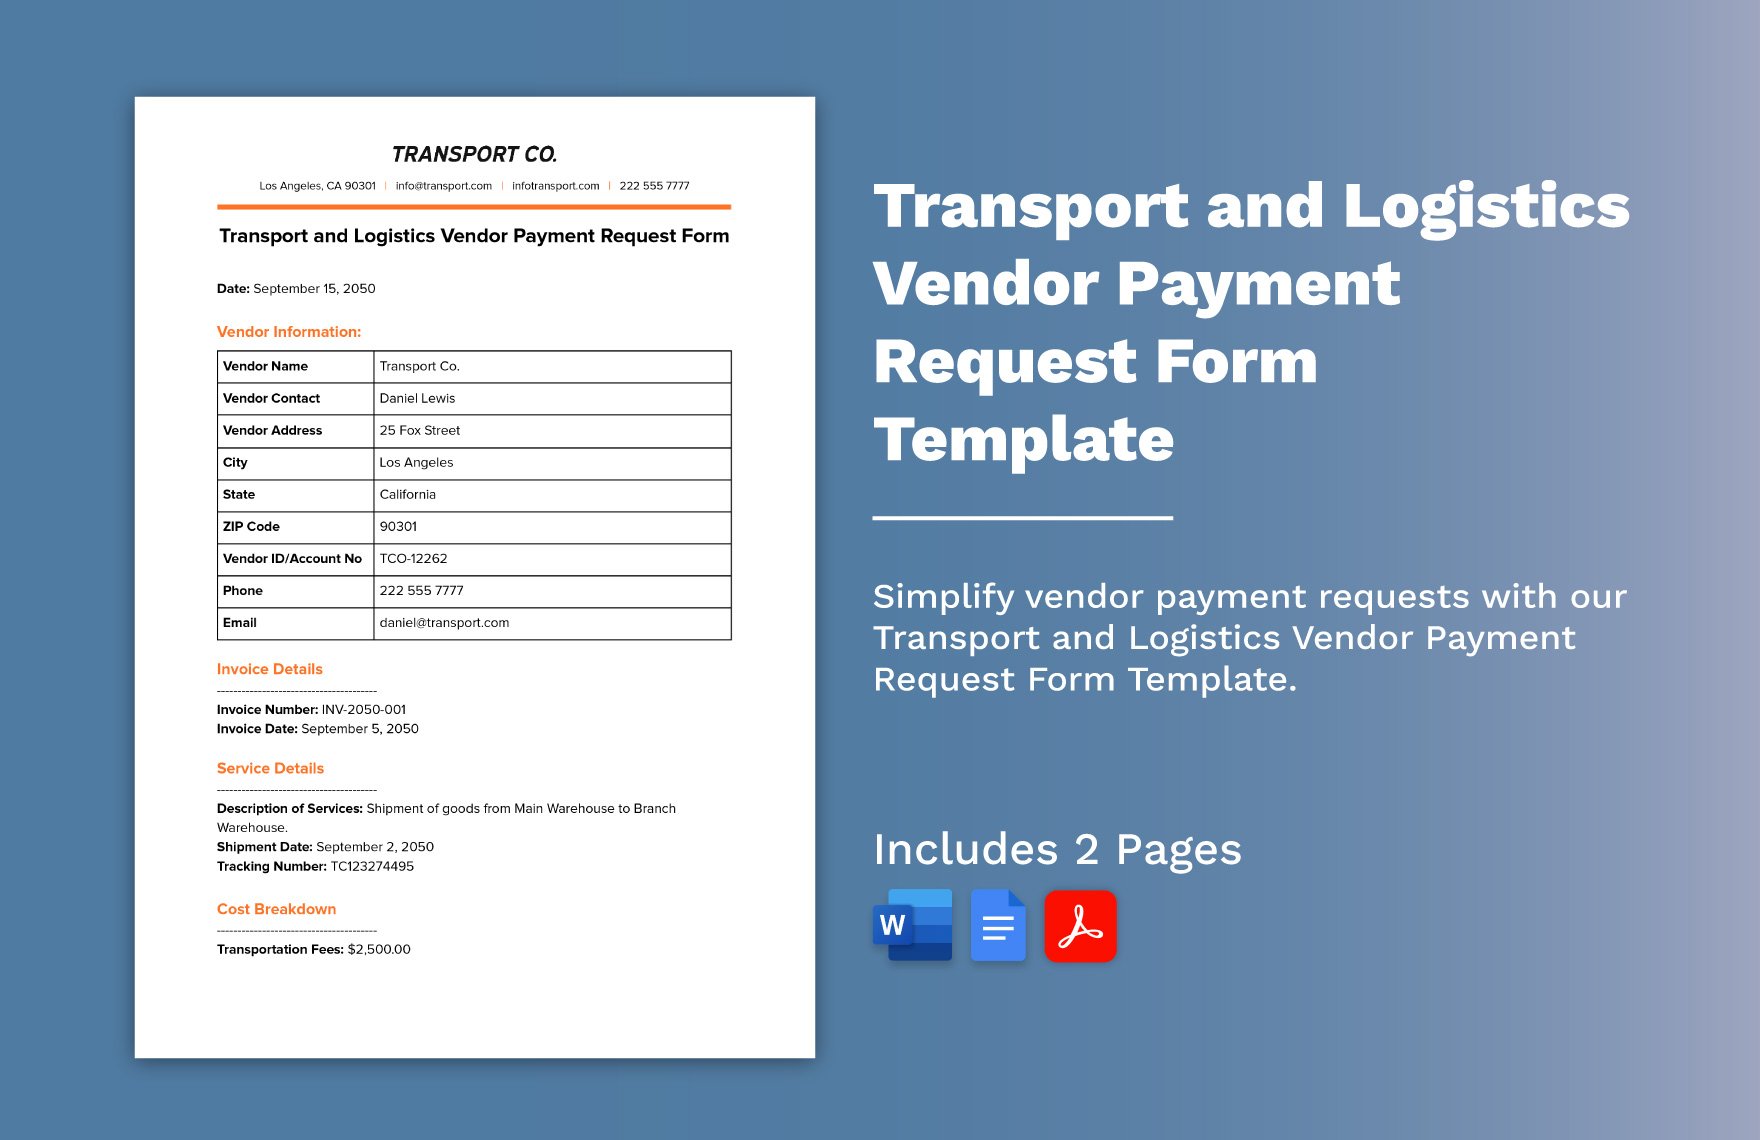 Free Transport and Logistics Vendor Payment Request Form Template in Word, Google Docs, PDF